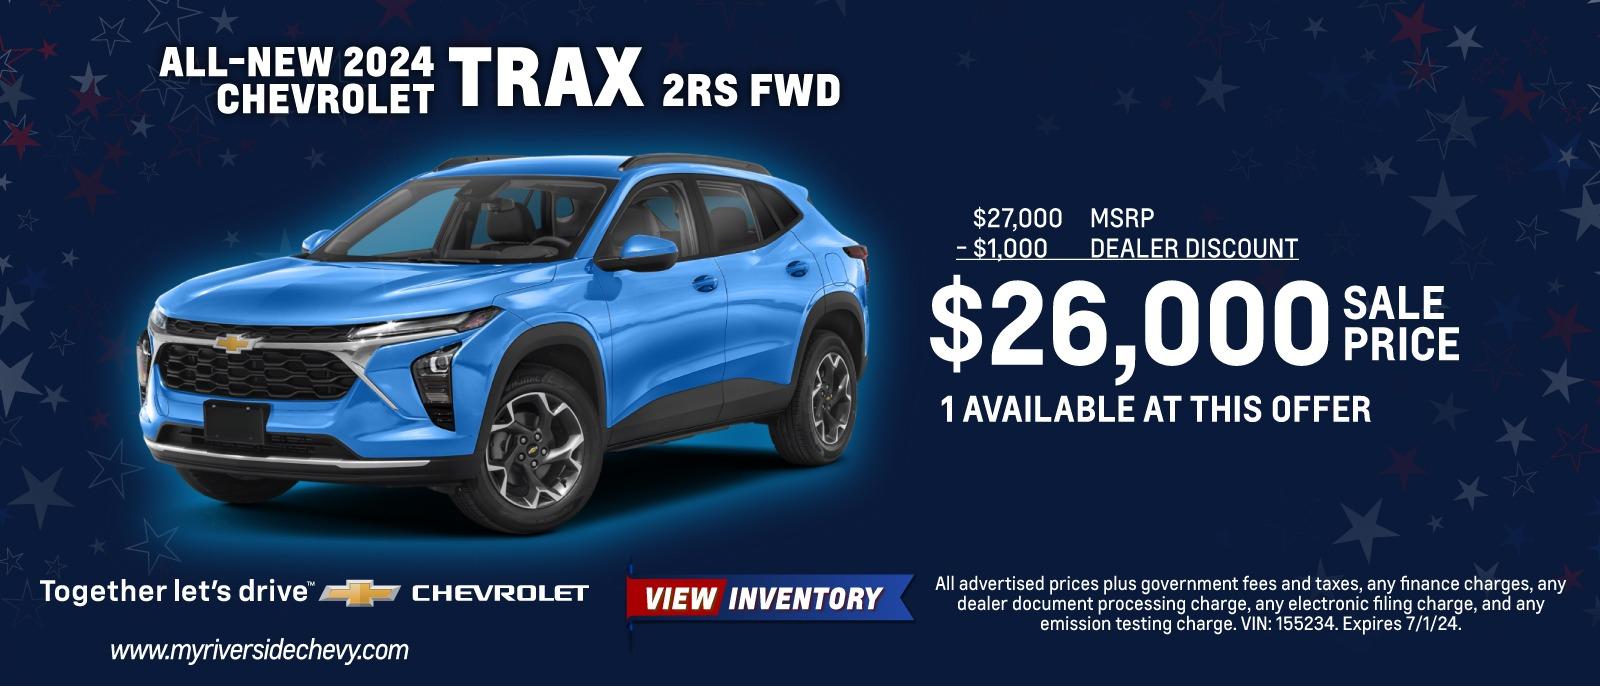 New 2024 Chevy  Trax 2RS FWD - $27,000 MSRP - $1,000 DEALER DISCOUNT $26,000 SACE PRICE 1 AVAILABLE AT THIS OFFER